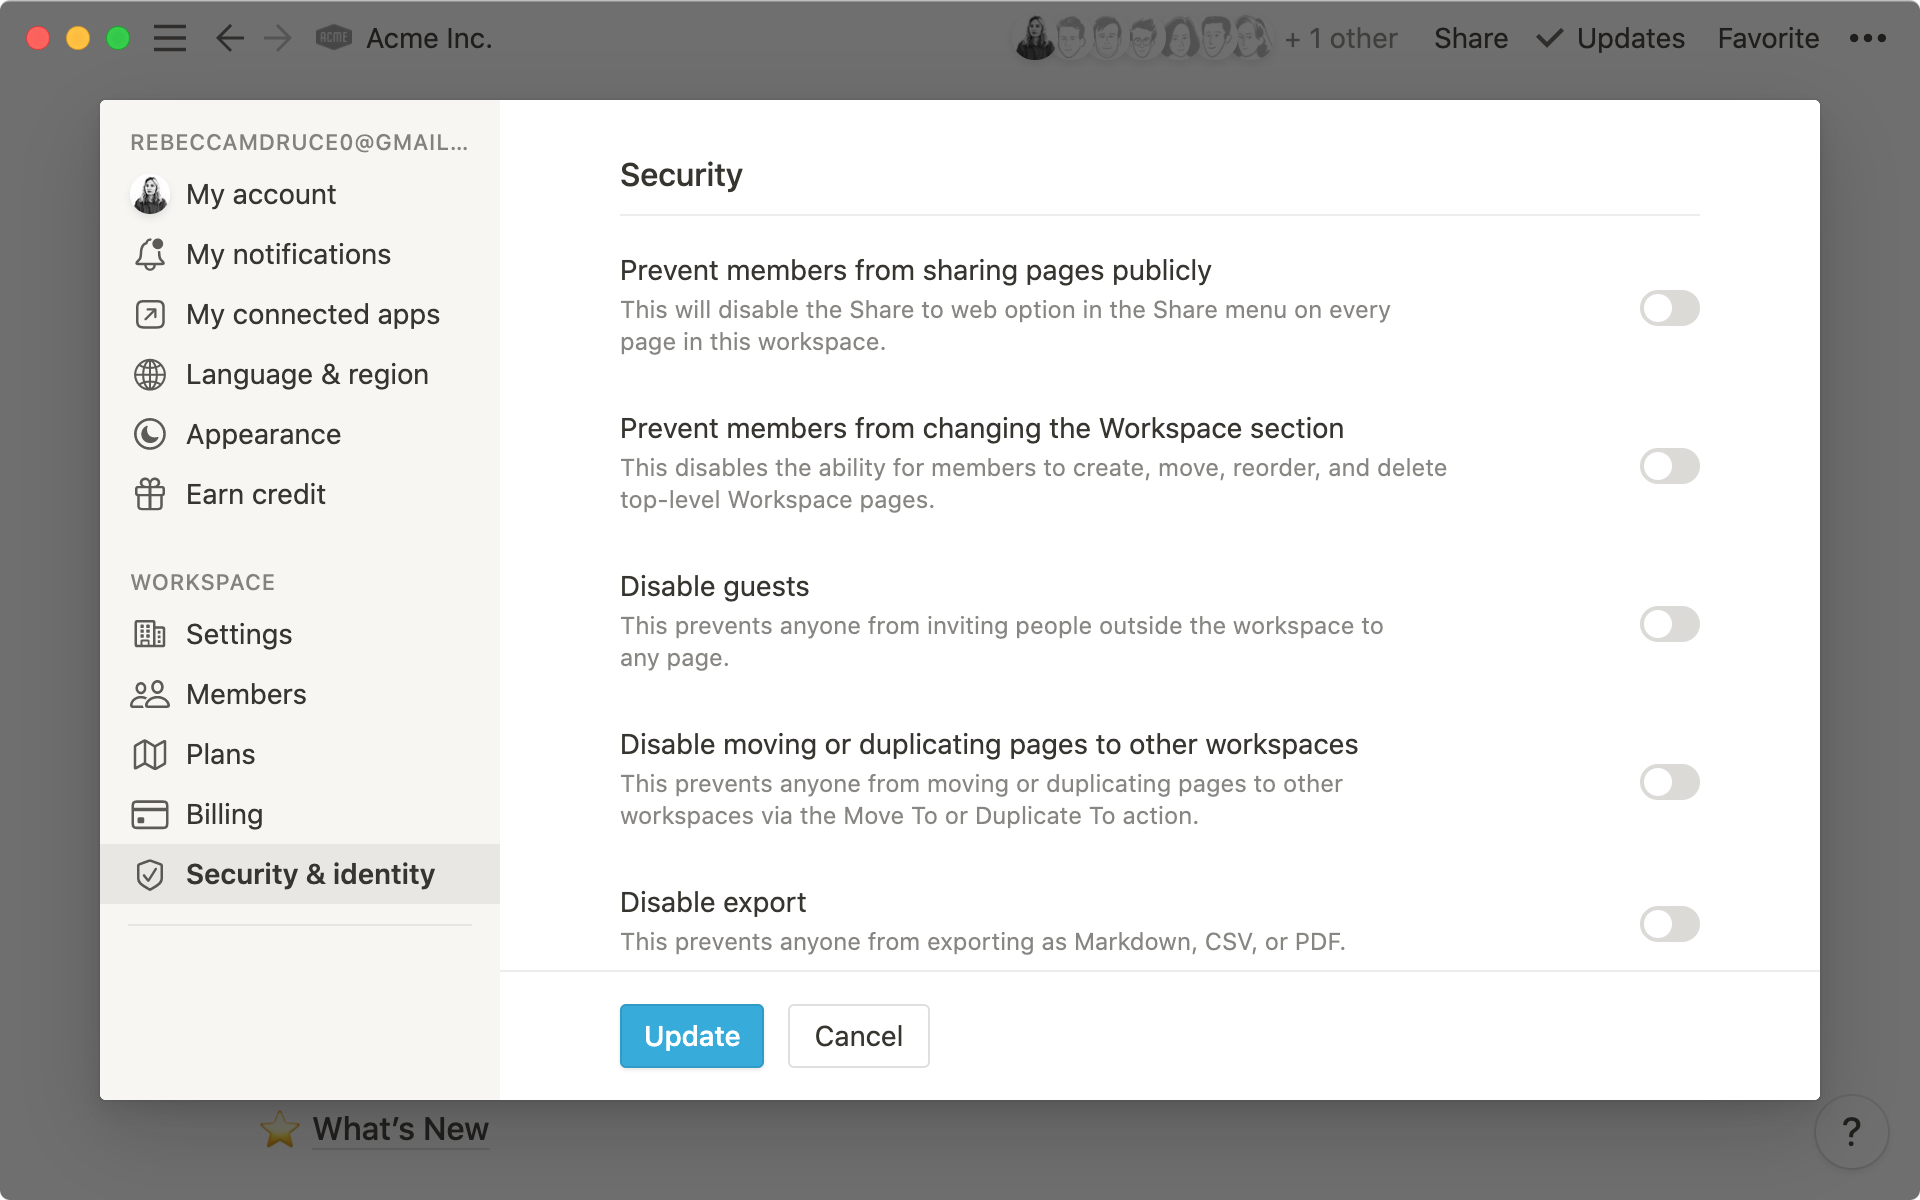 Admins can decide how pages in their workspace are shared.